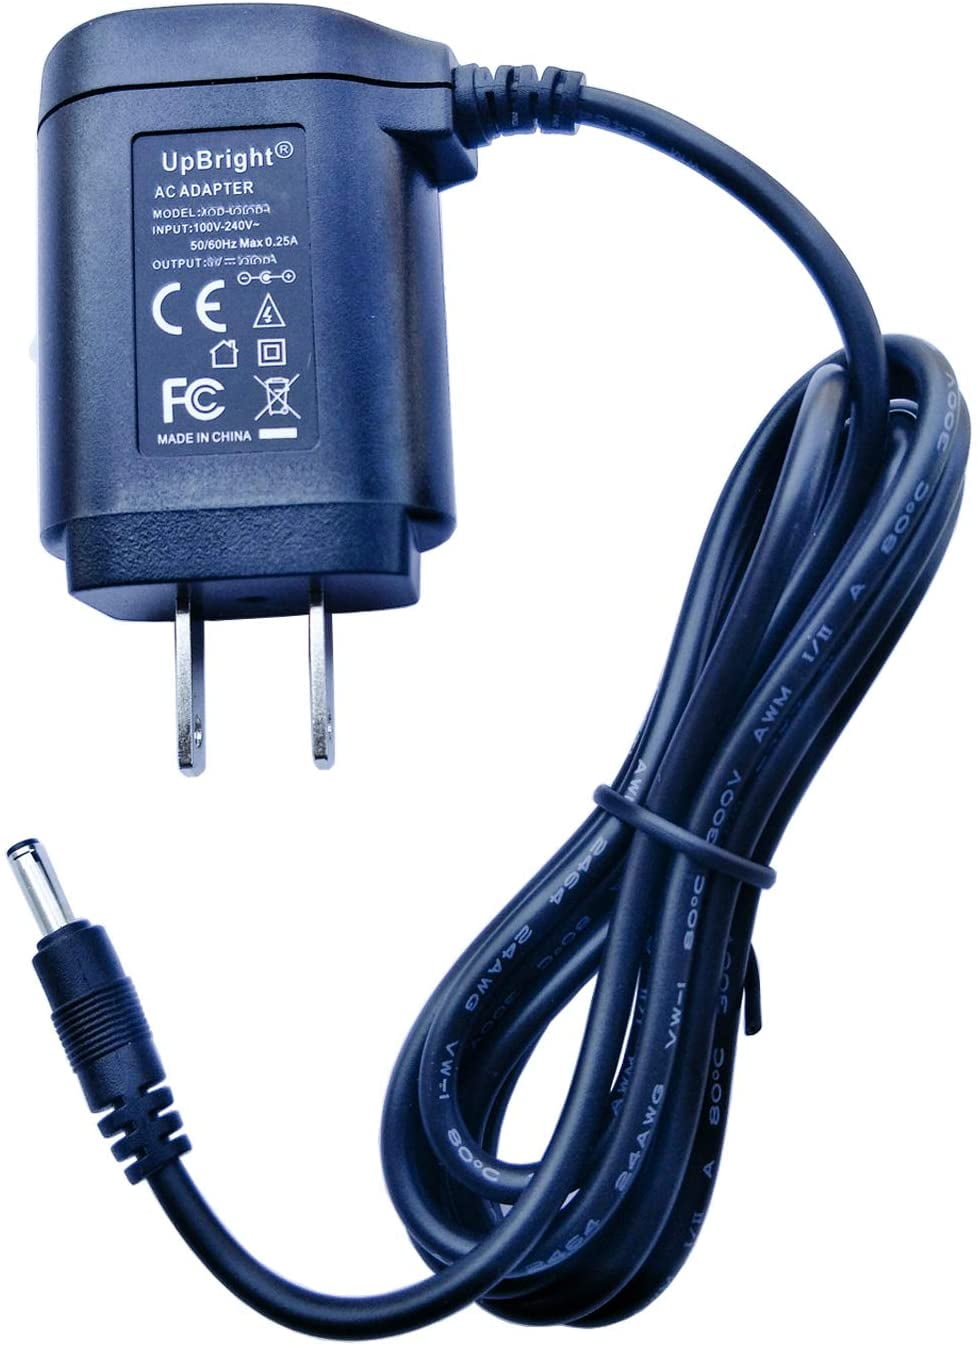 AC Adapter For Wahl 97581-1305 S003HU0420060 Class 2 Power Supply Cord Charger 